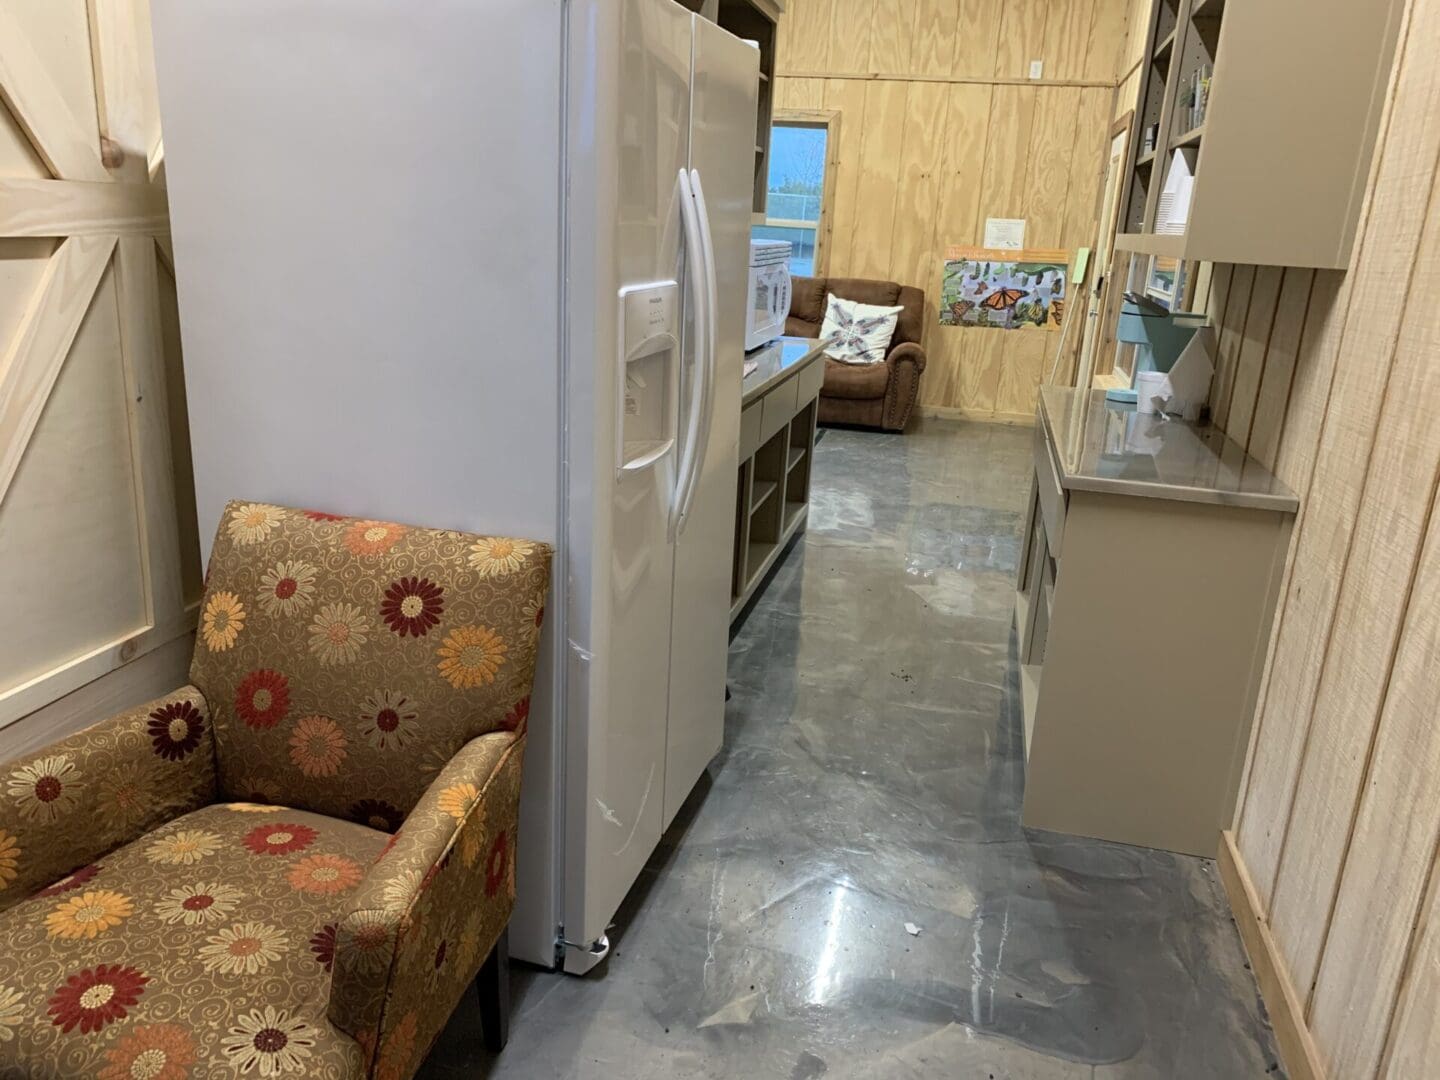 A kitchen with a refrigerator and chairs in it